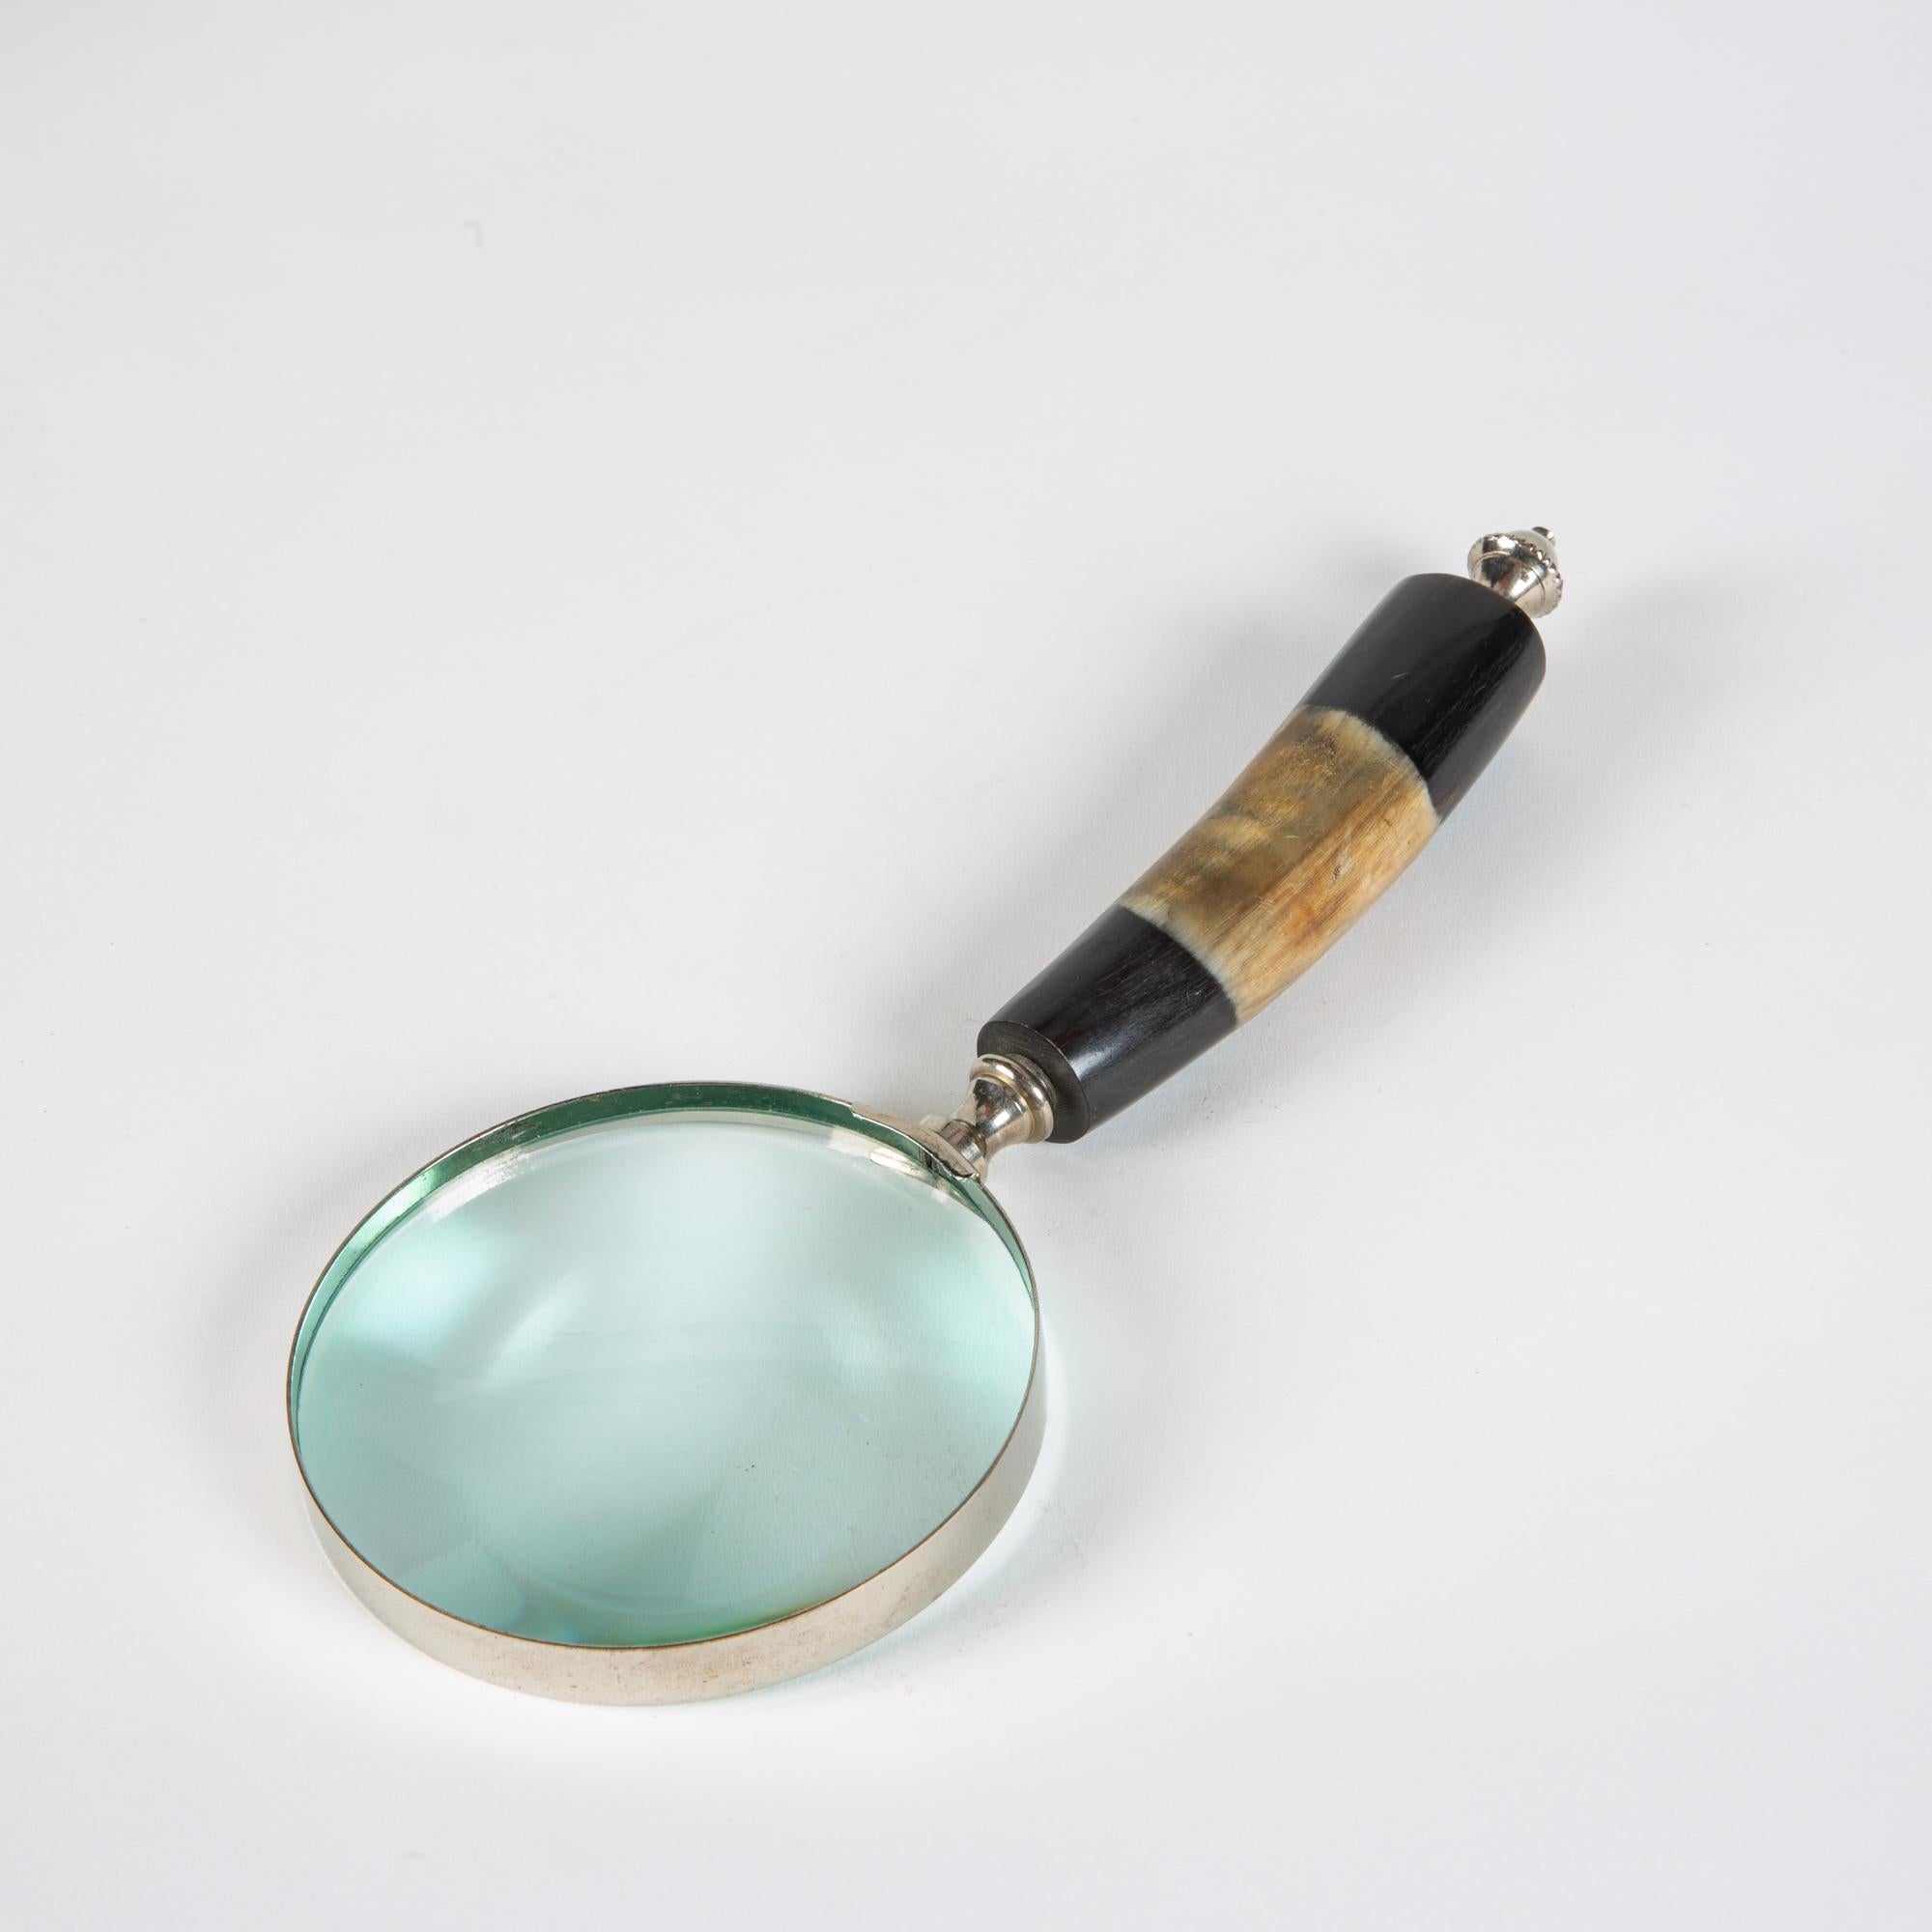 20th Century Magnifying Glass with Polished Horn Handle